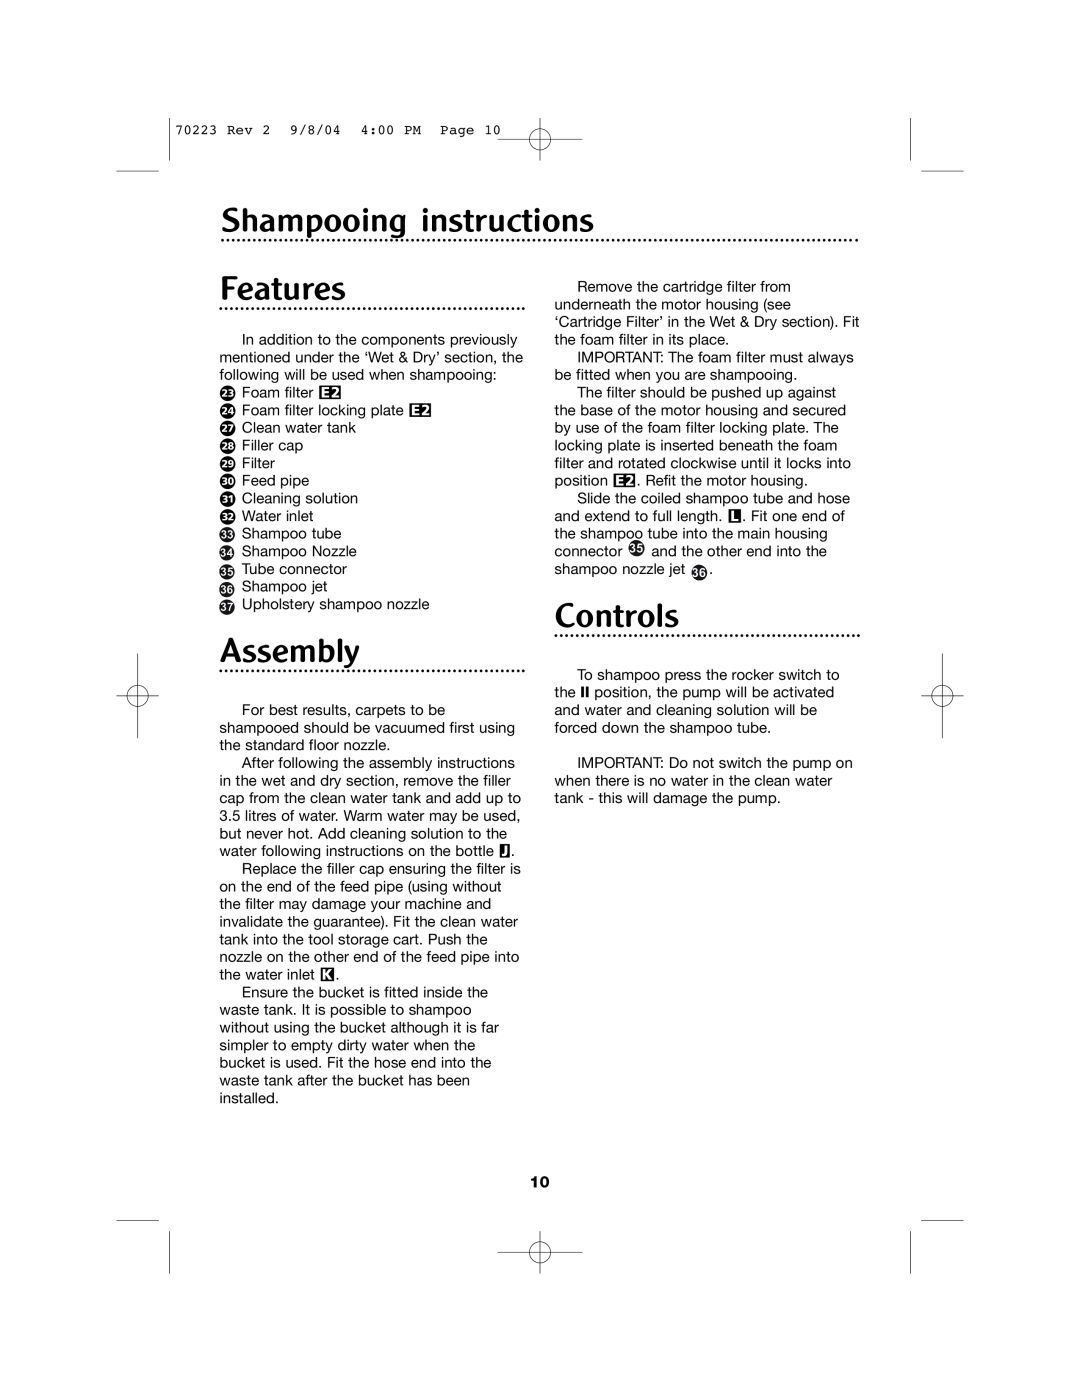 Morphy Richards Carpet Cleaner manual Shampooing instructions, Controls, Features, Assembly 